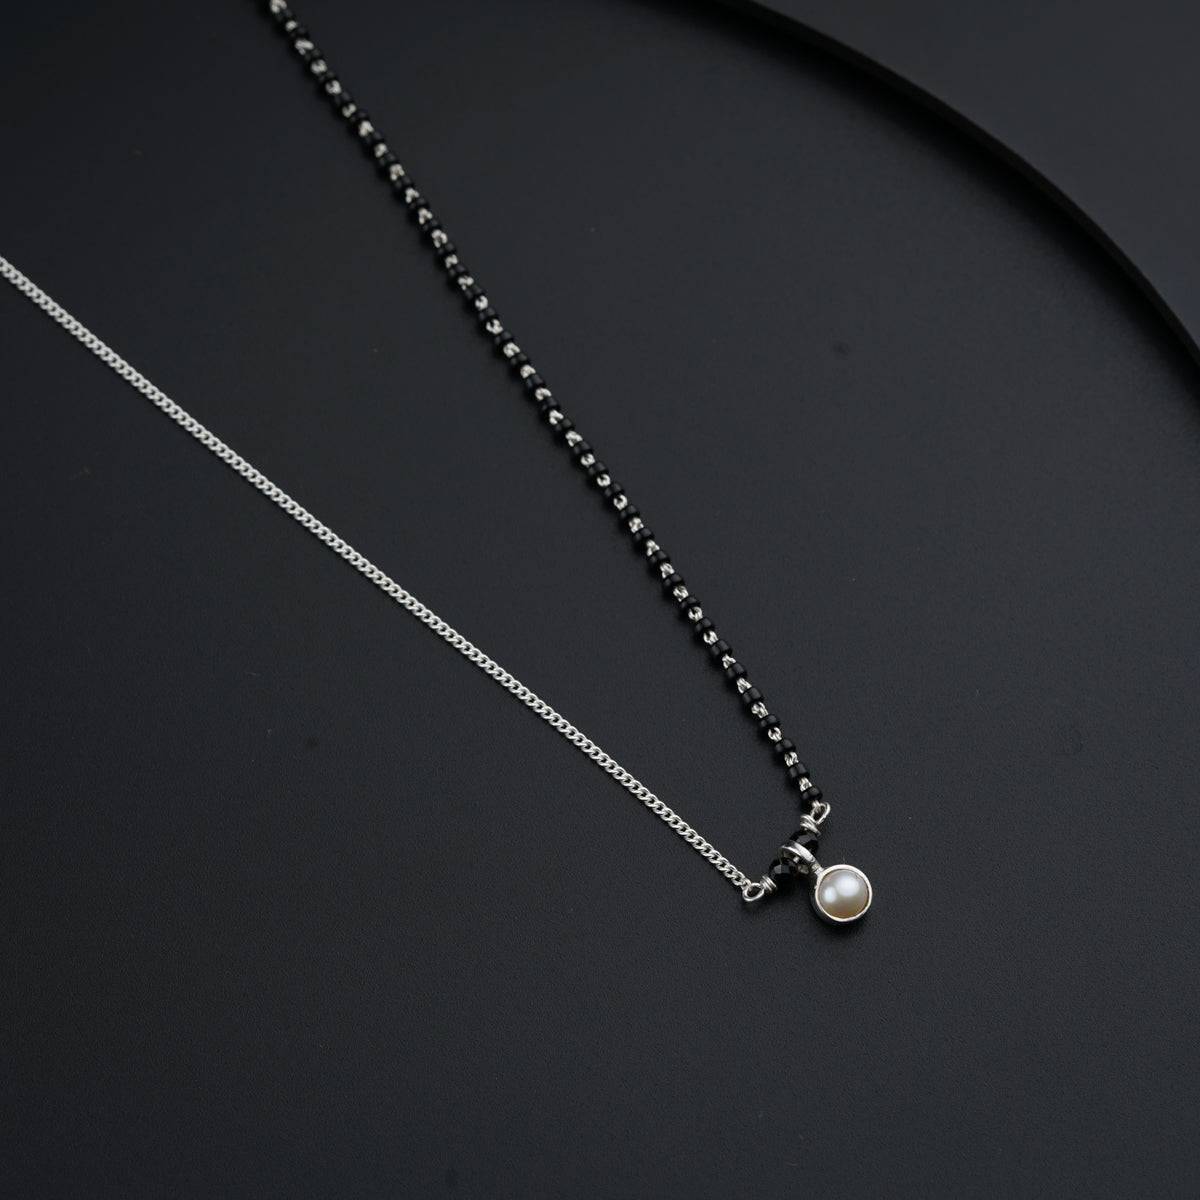 a black and white photo of two necklaces